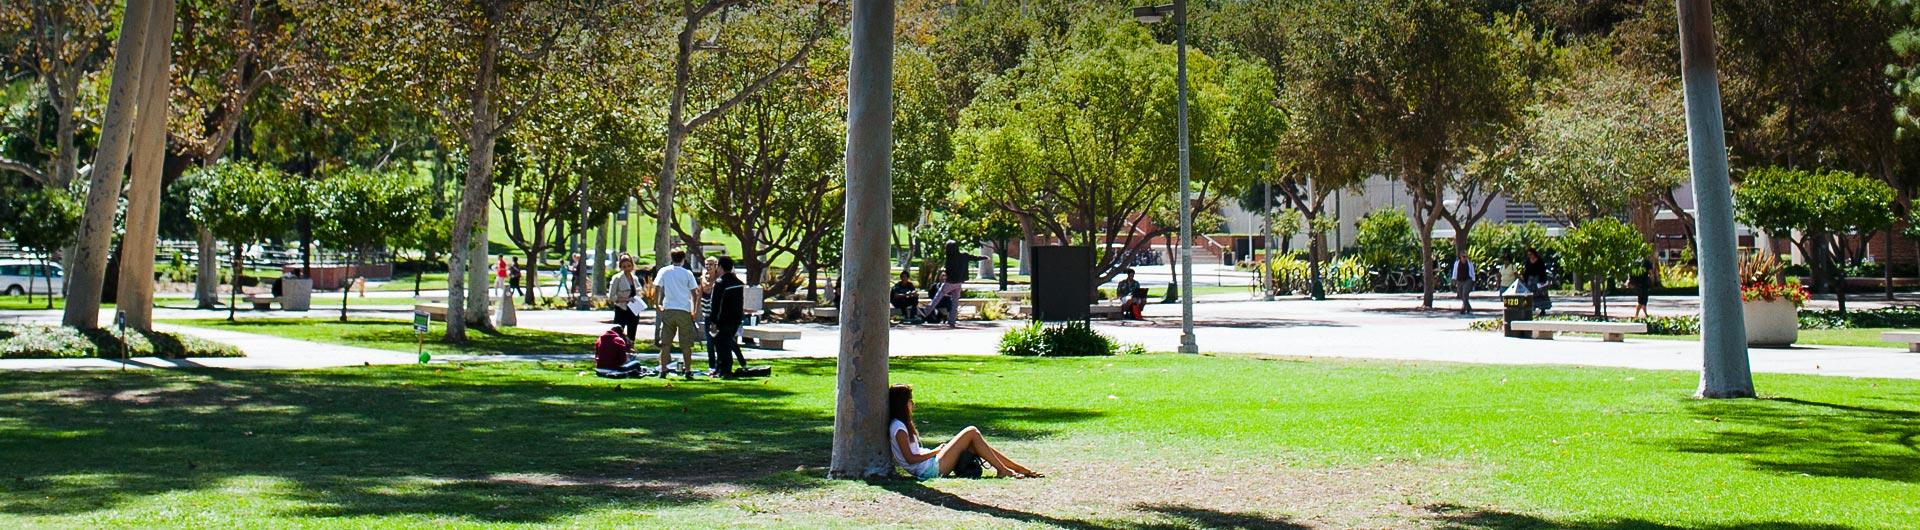 Campus green areas